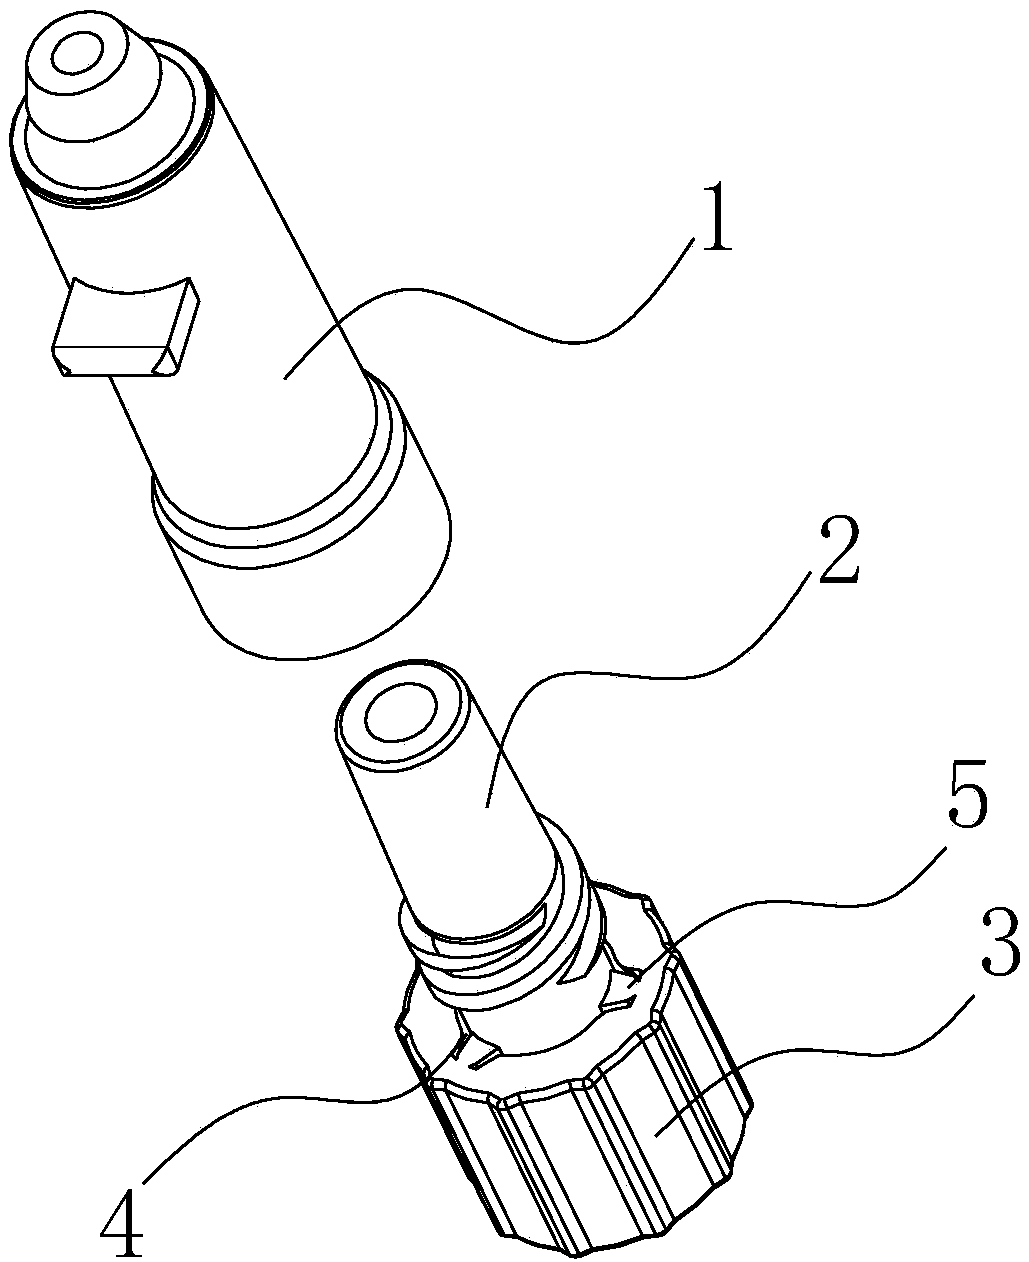 Integrated connecting device